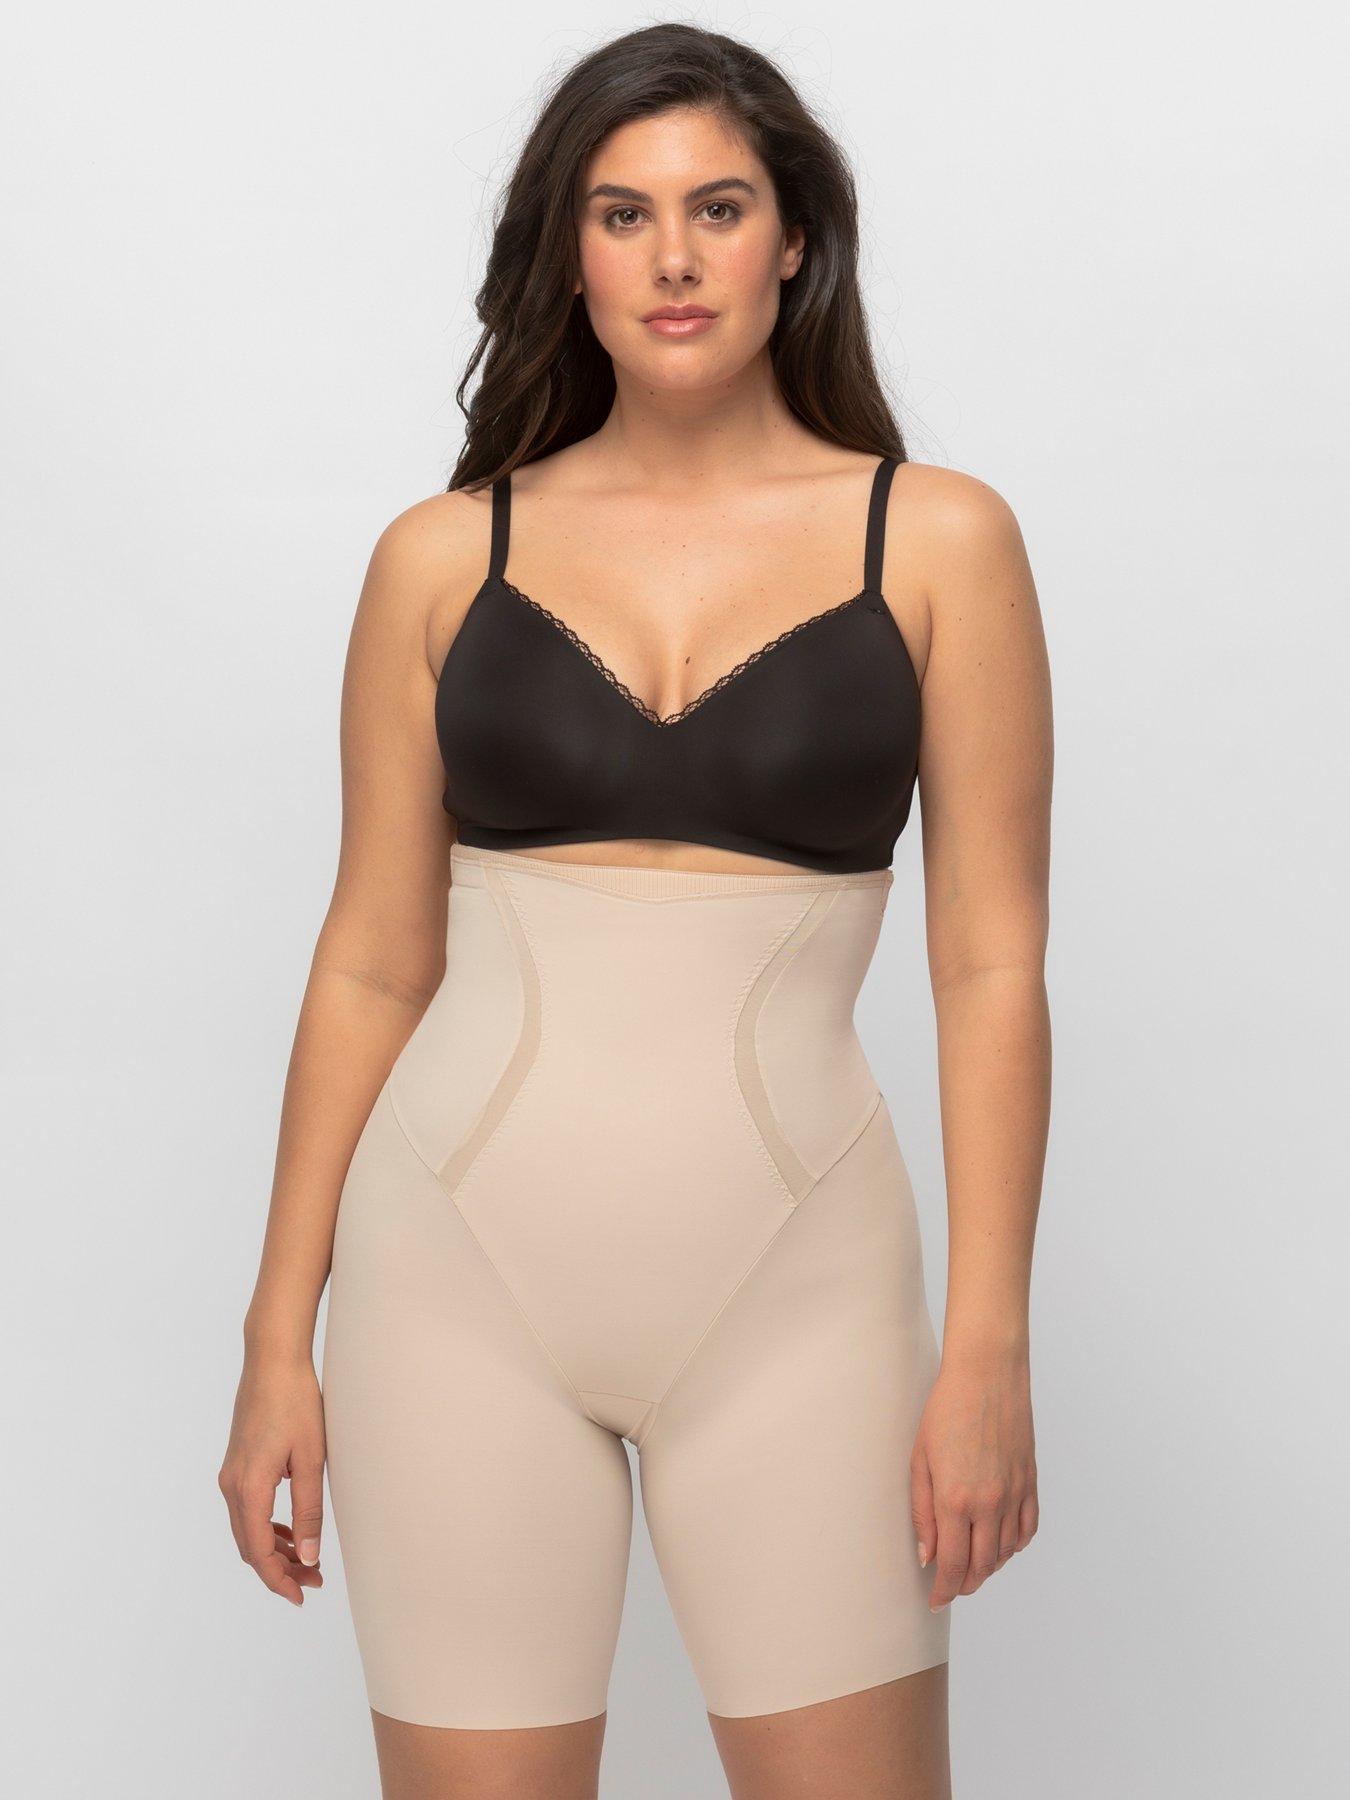 V by Very Anti Chafing Short - Nude